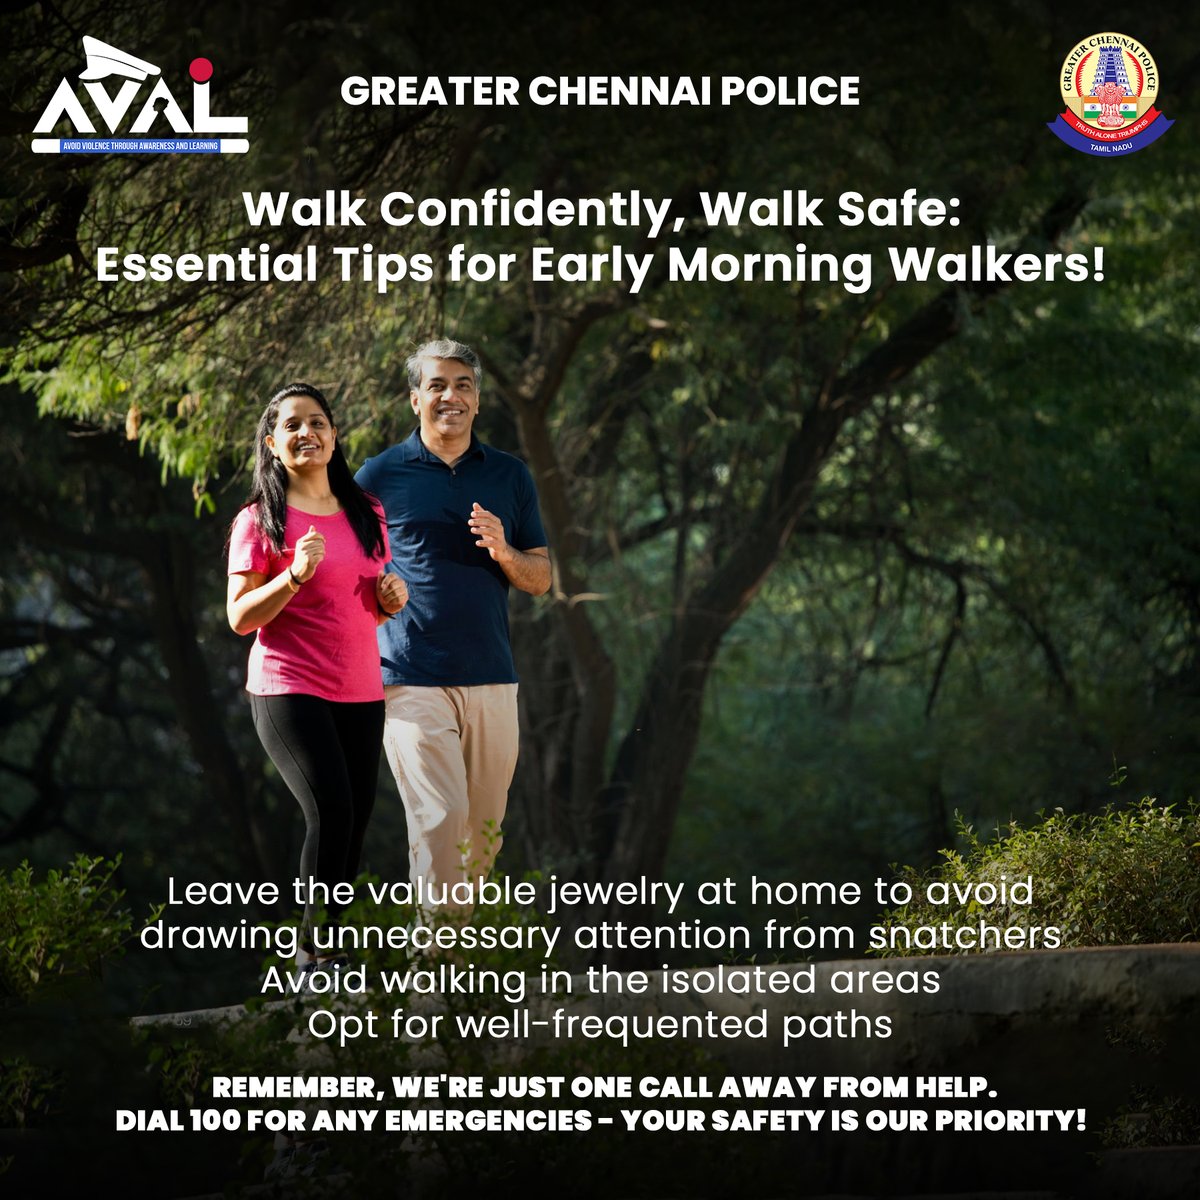 Opt for well-frequented paths. Walk with confidence and peace of mind.  Remember, we're just one call away from help. Dial 100 for any emergencies - your safety is our priority! 📞🚨 

#WalkSafe #StaySecure #BePrepared #அவள் #avalbygcp #avalsafety #avalawareness #GCPAVAL